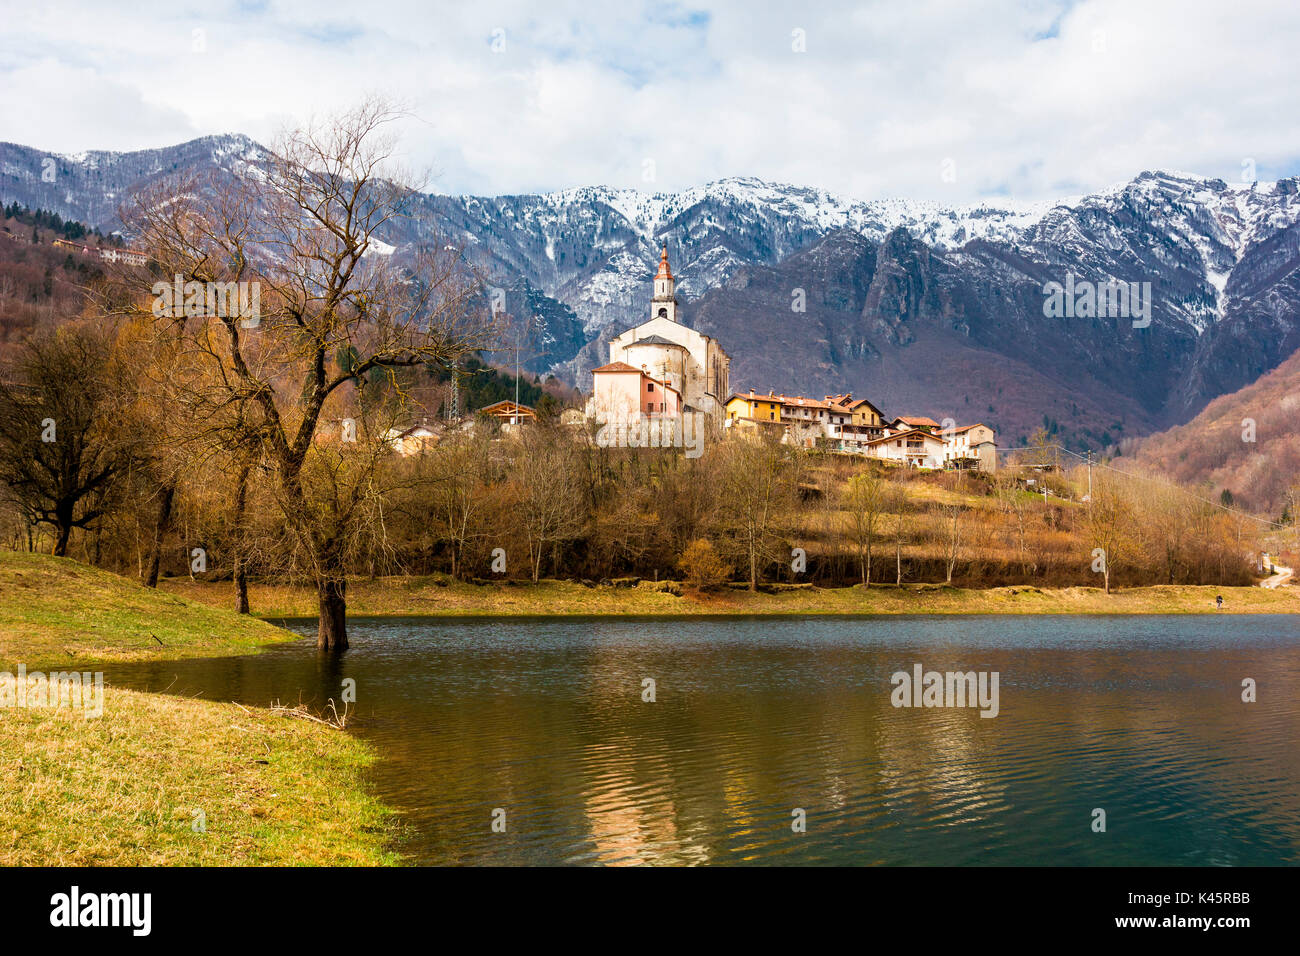 Laghi, Province of Vicenza, Veneto, Italy. Small Church surrounded by mountains. Stock Photo